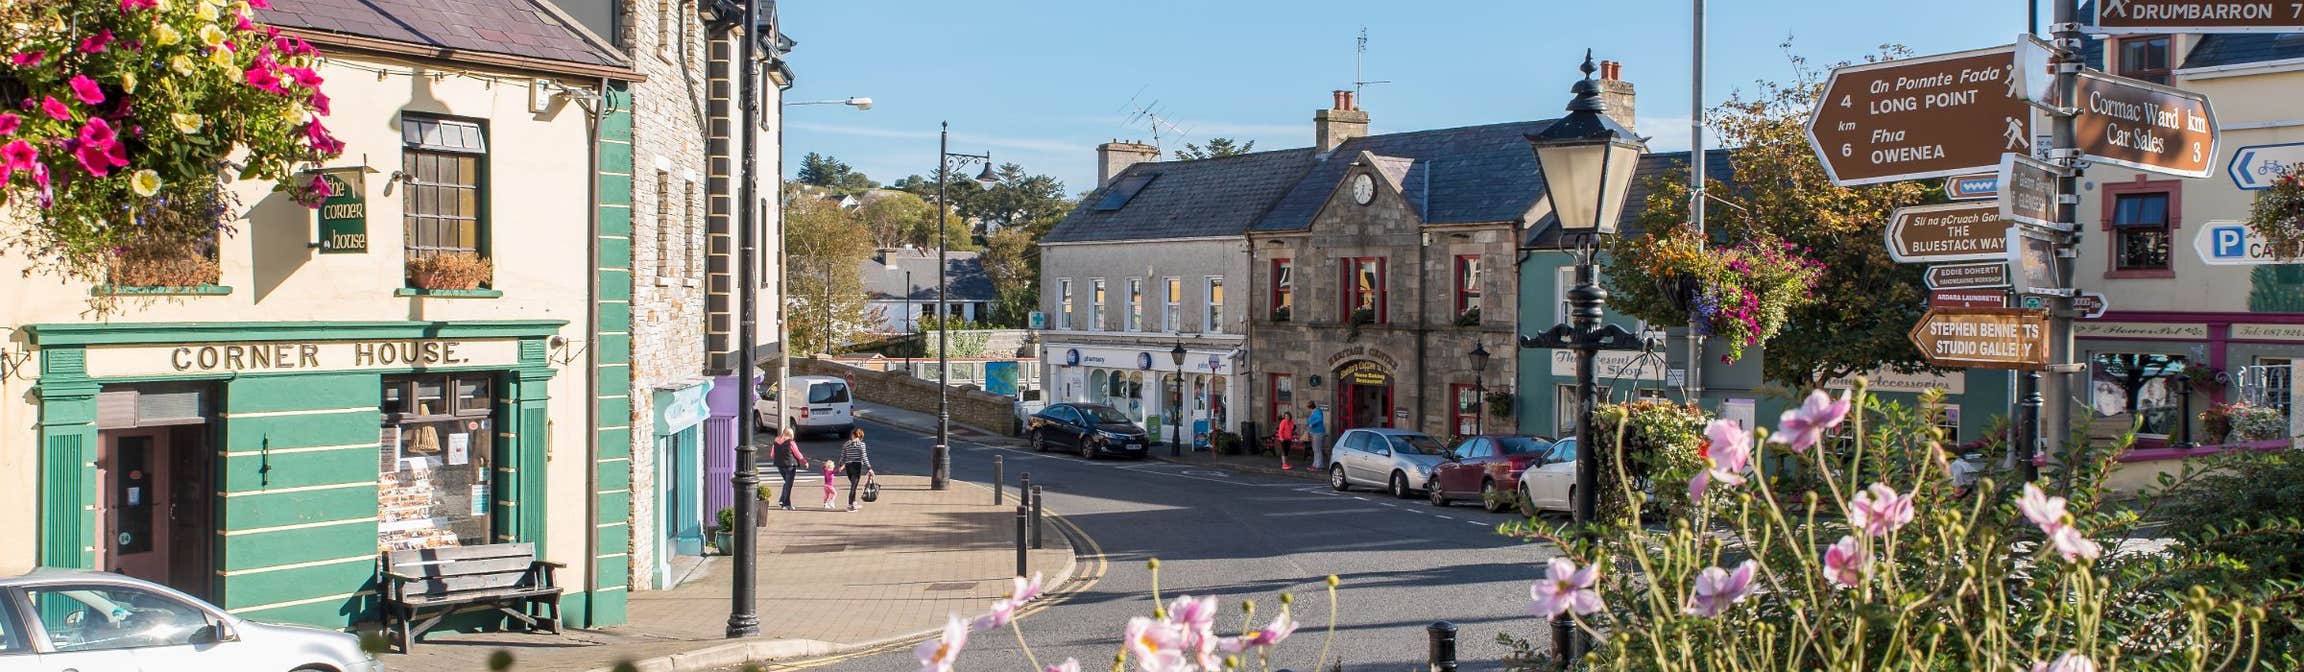 Image of the town in Ardara in County Donegal